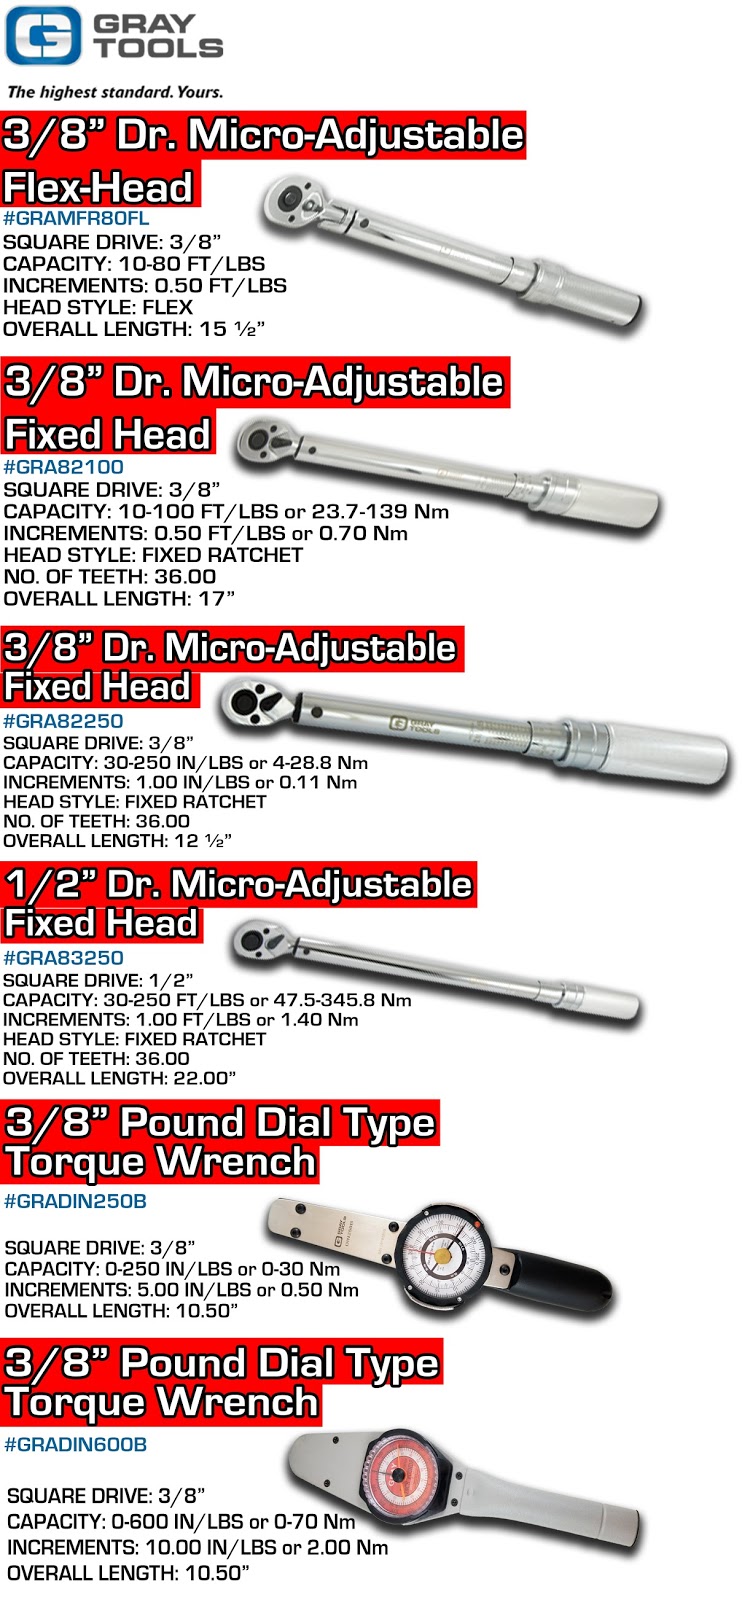 6 Different Types of Torque Wrenches (and Sizes)